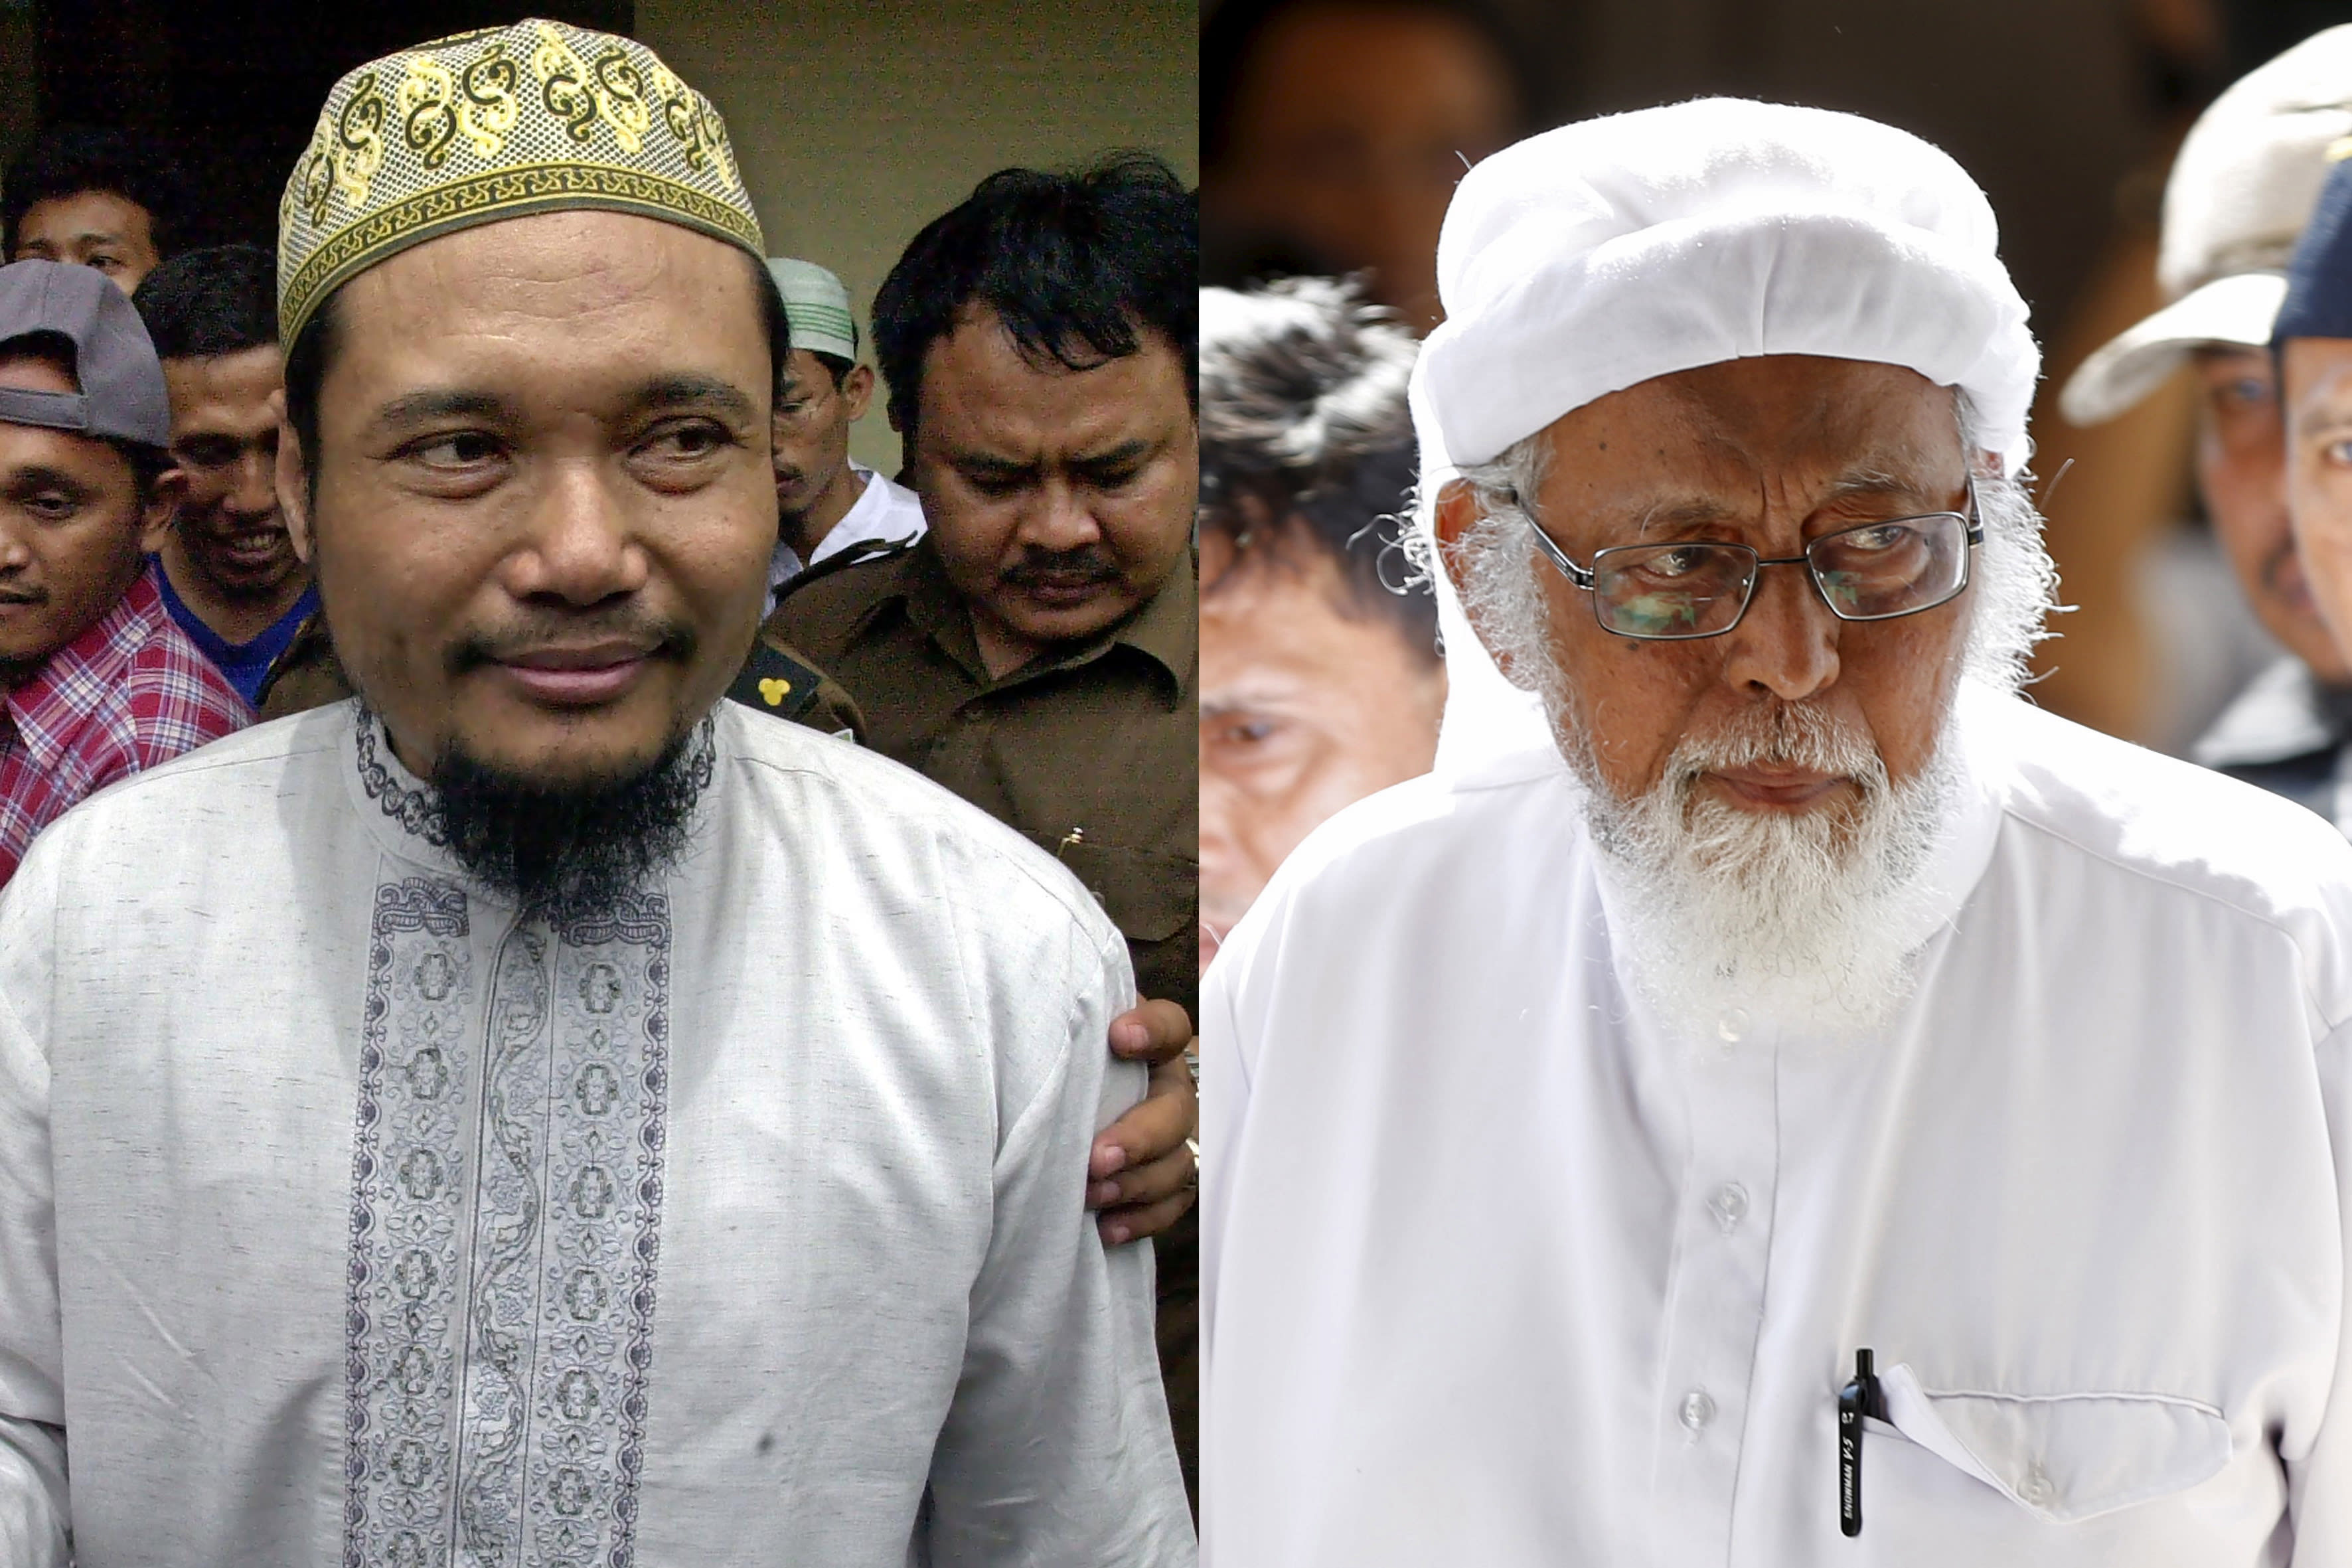 The Big Read: Jemaah Islamiyah emerges from the shadows, playing the long game